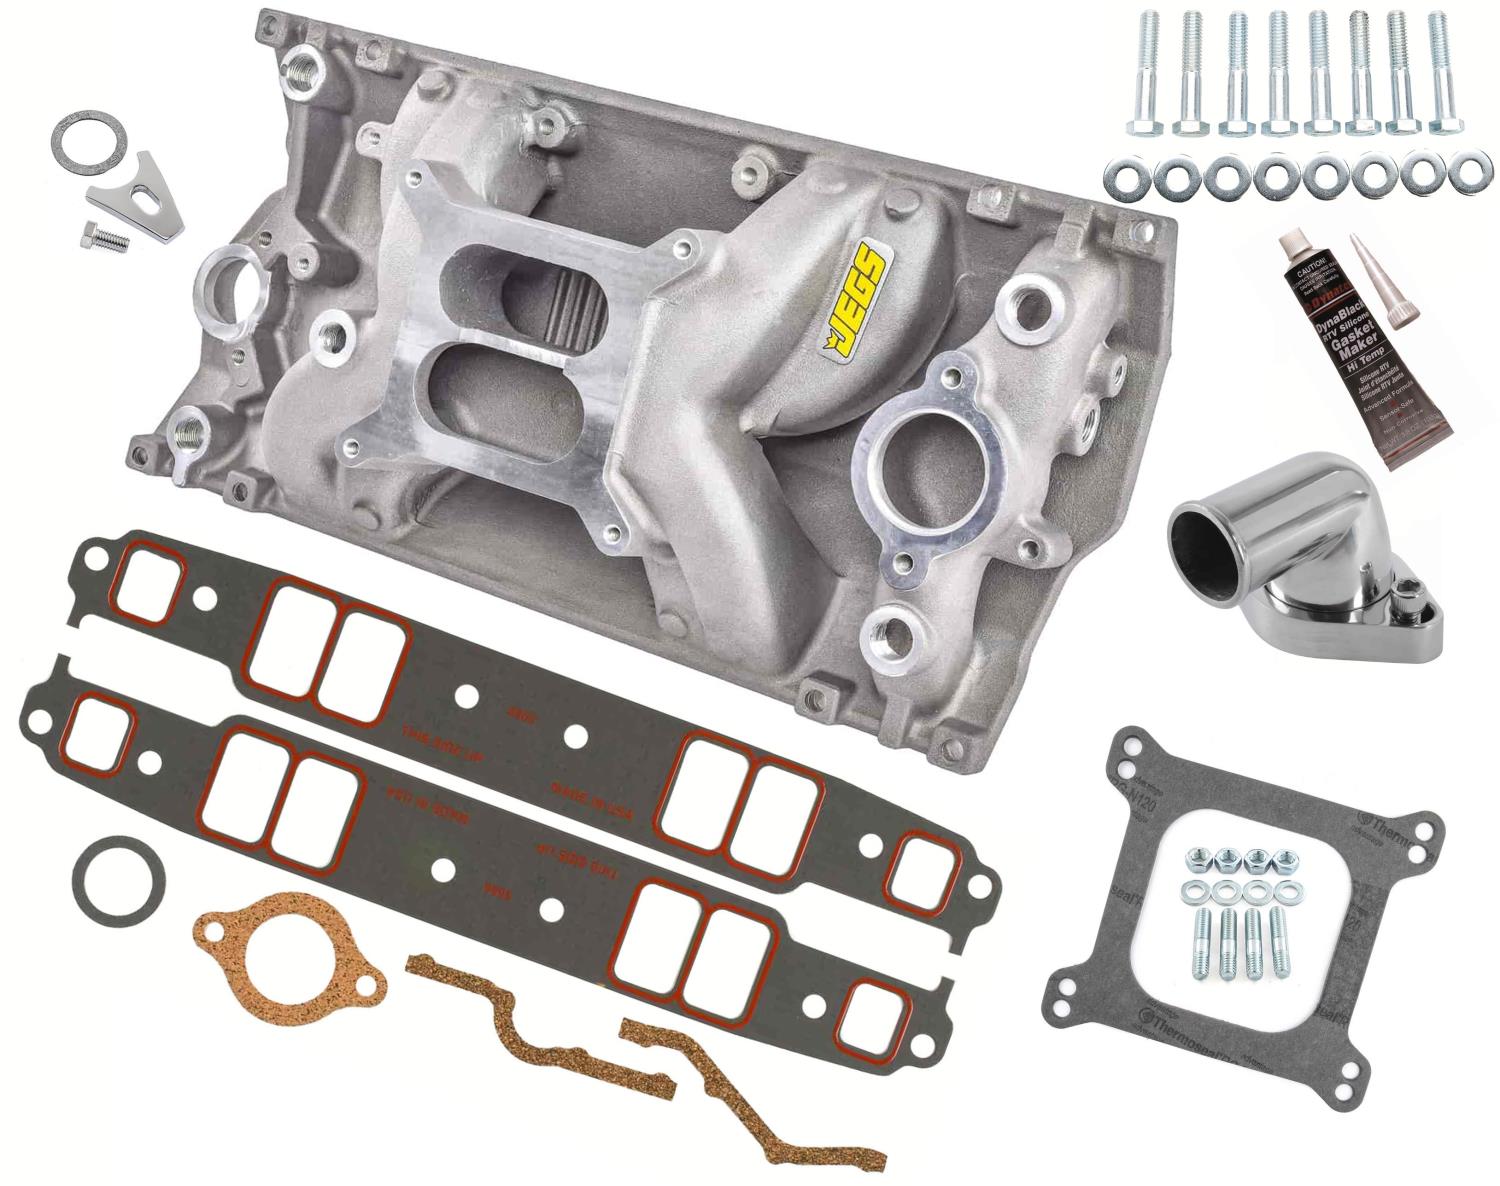 Cool Gap Intake Manifold Kit for Small Block Chevy with 1996-2002 Vortec L31 Cast Iron Heads, Dual Plane [Satin]